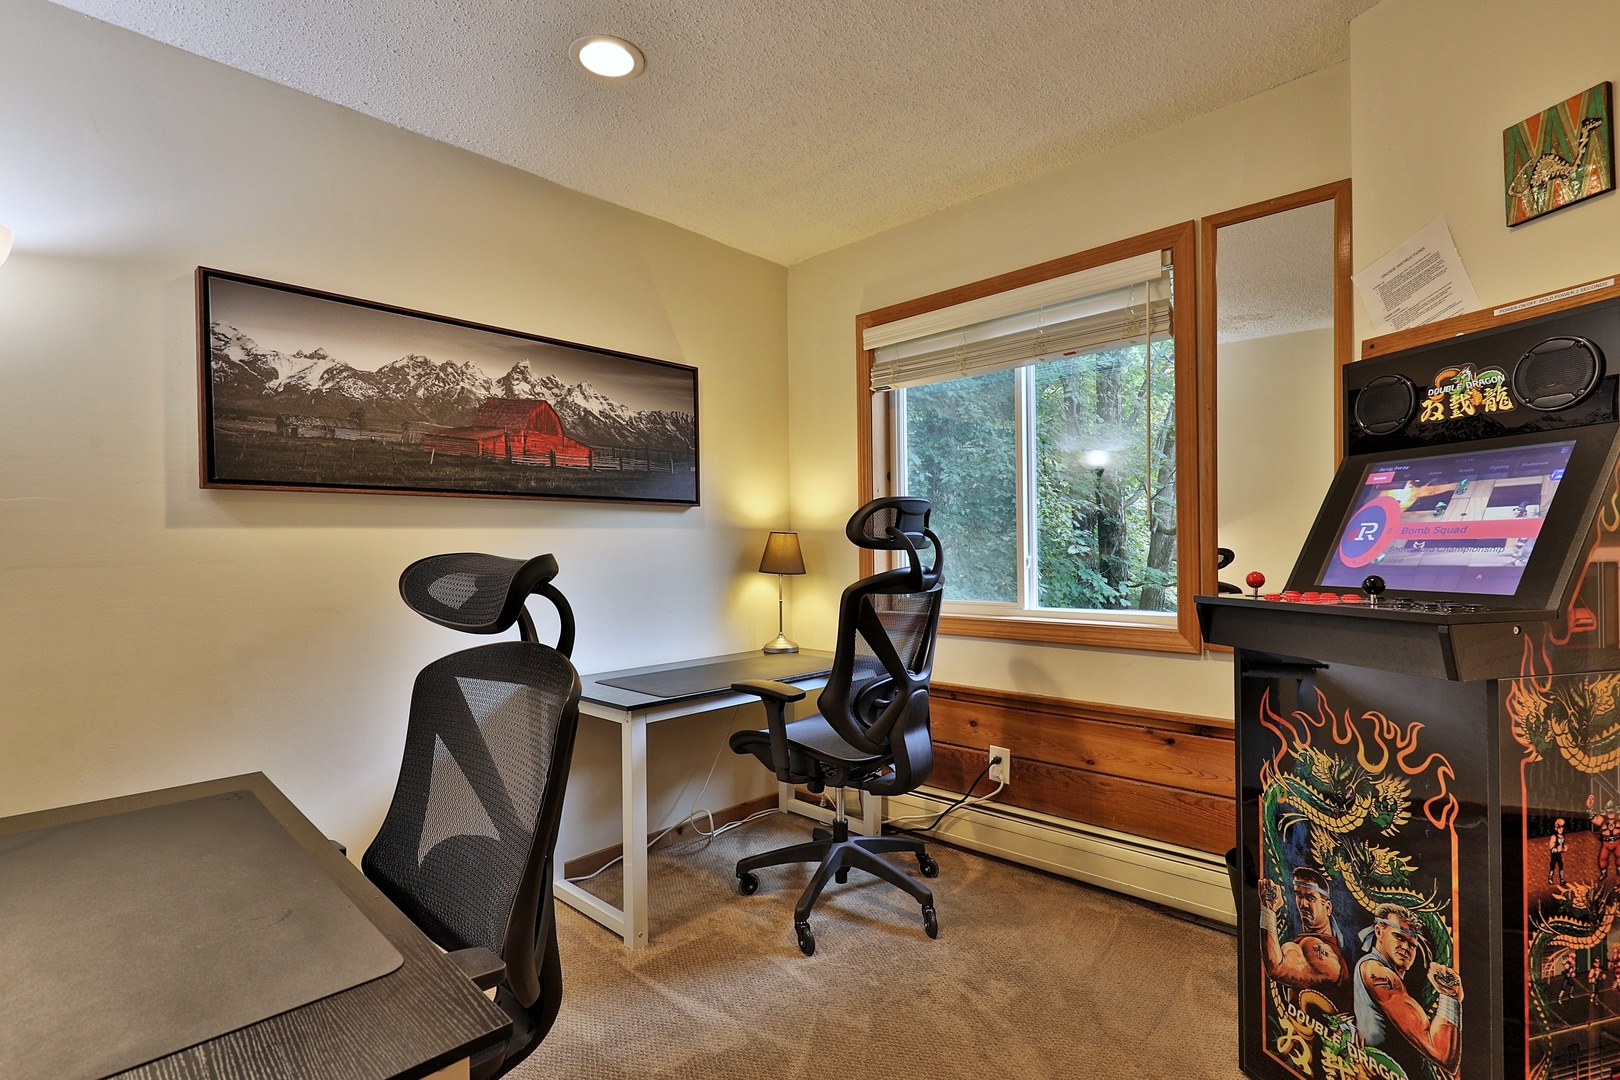 Office on the main floor with two desks and classic arcade console